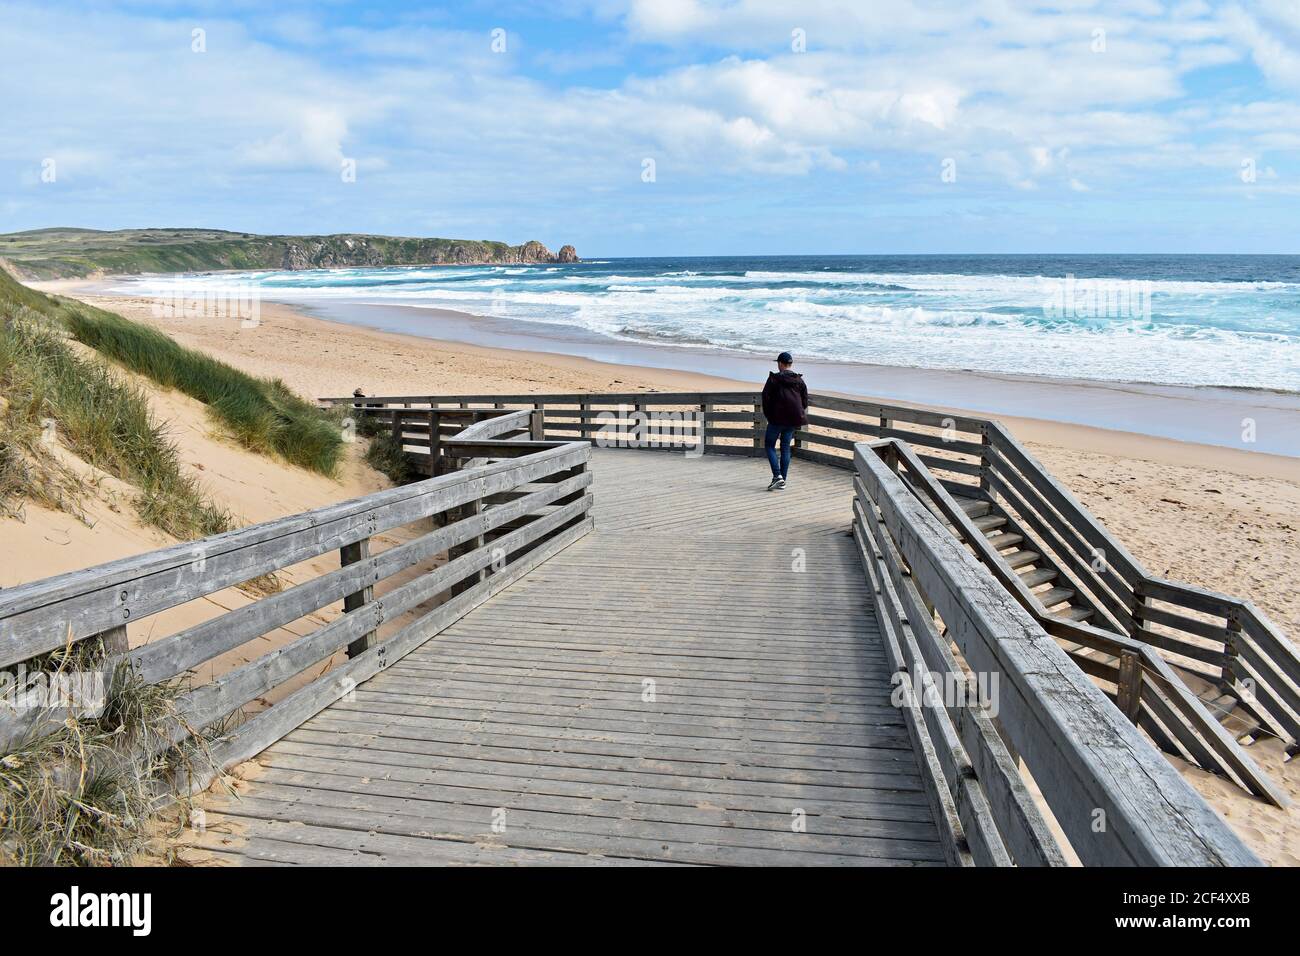 A visitor walks along the boardwalk down to the Cape Woolamai Surf Beach on Phillip Island, Australia.  Golden sand and blue water of Bass Strait. Stock Photo